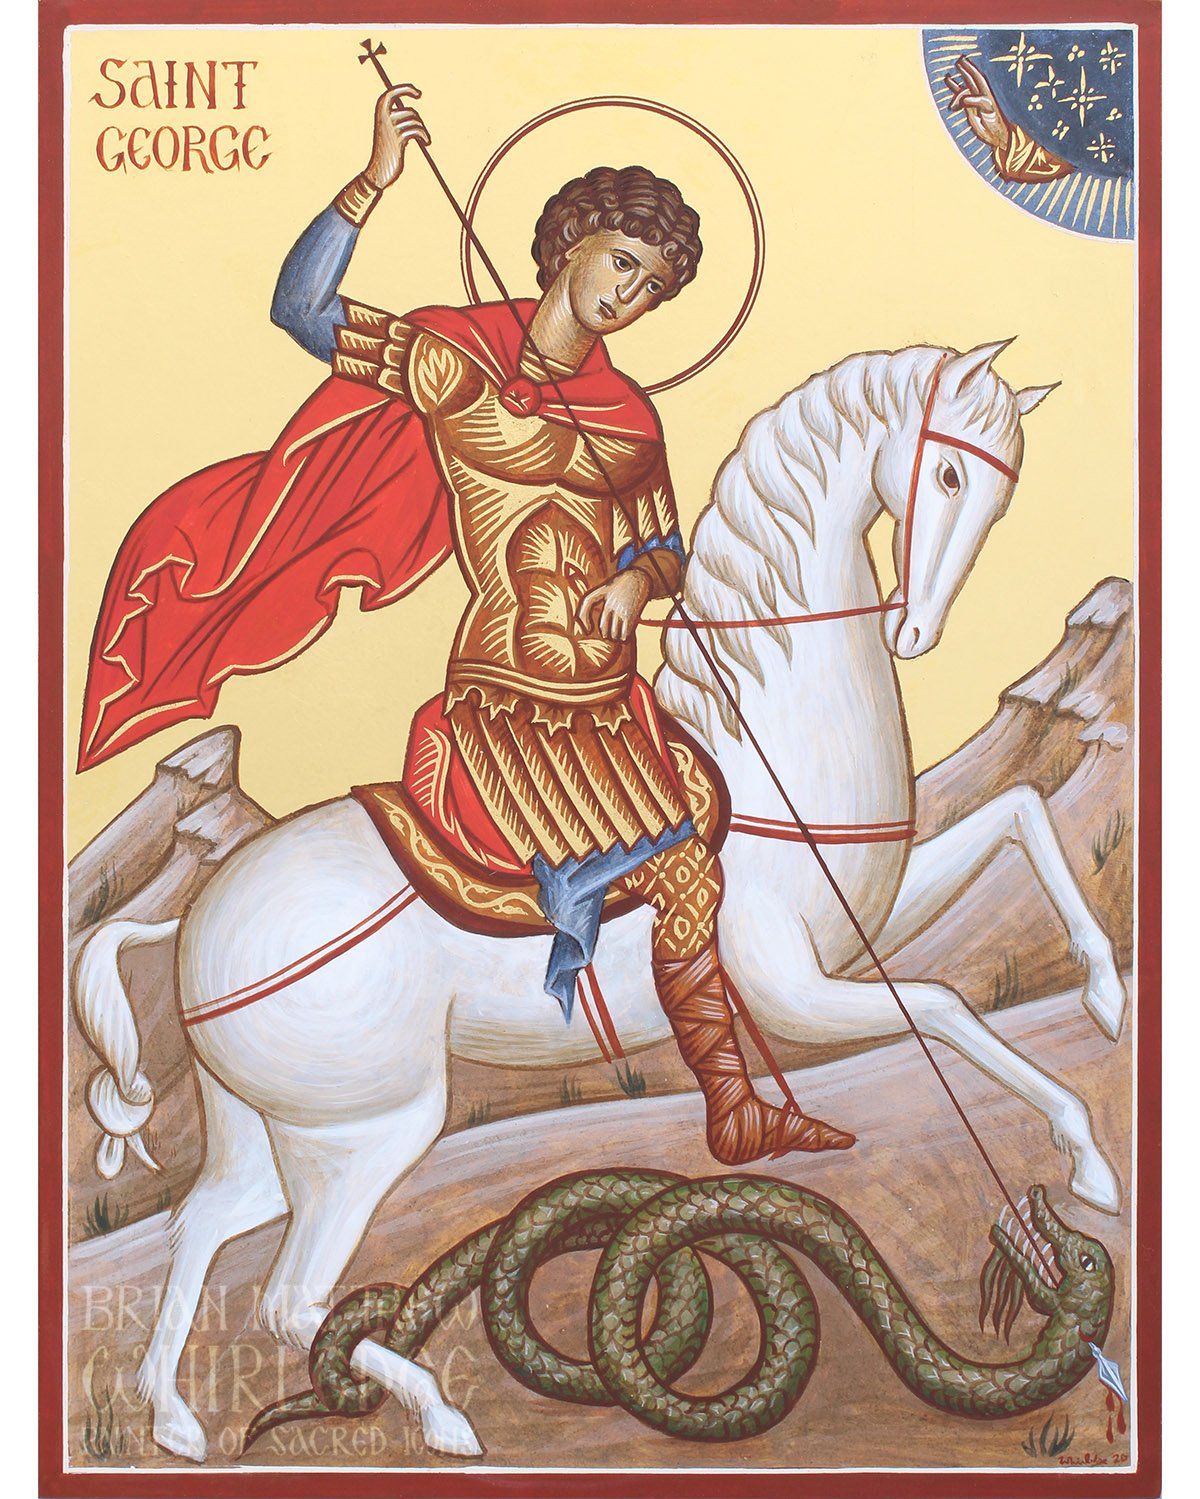 Saint George the Great Martyr was born in Cappadocia, the son of wealthy and virtuous parents. His father suffered for Christ, and his mother then moved to Palestine. When George grew up he entered the military, where he attained, in his twentieth ye